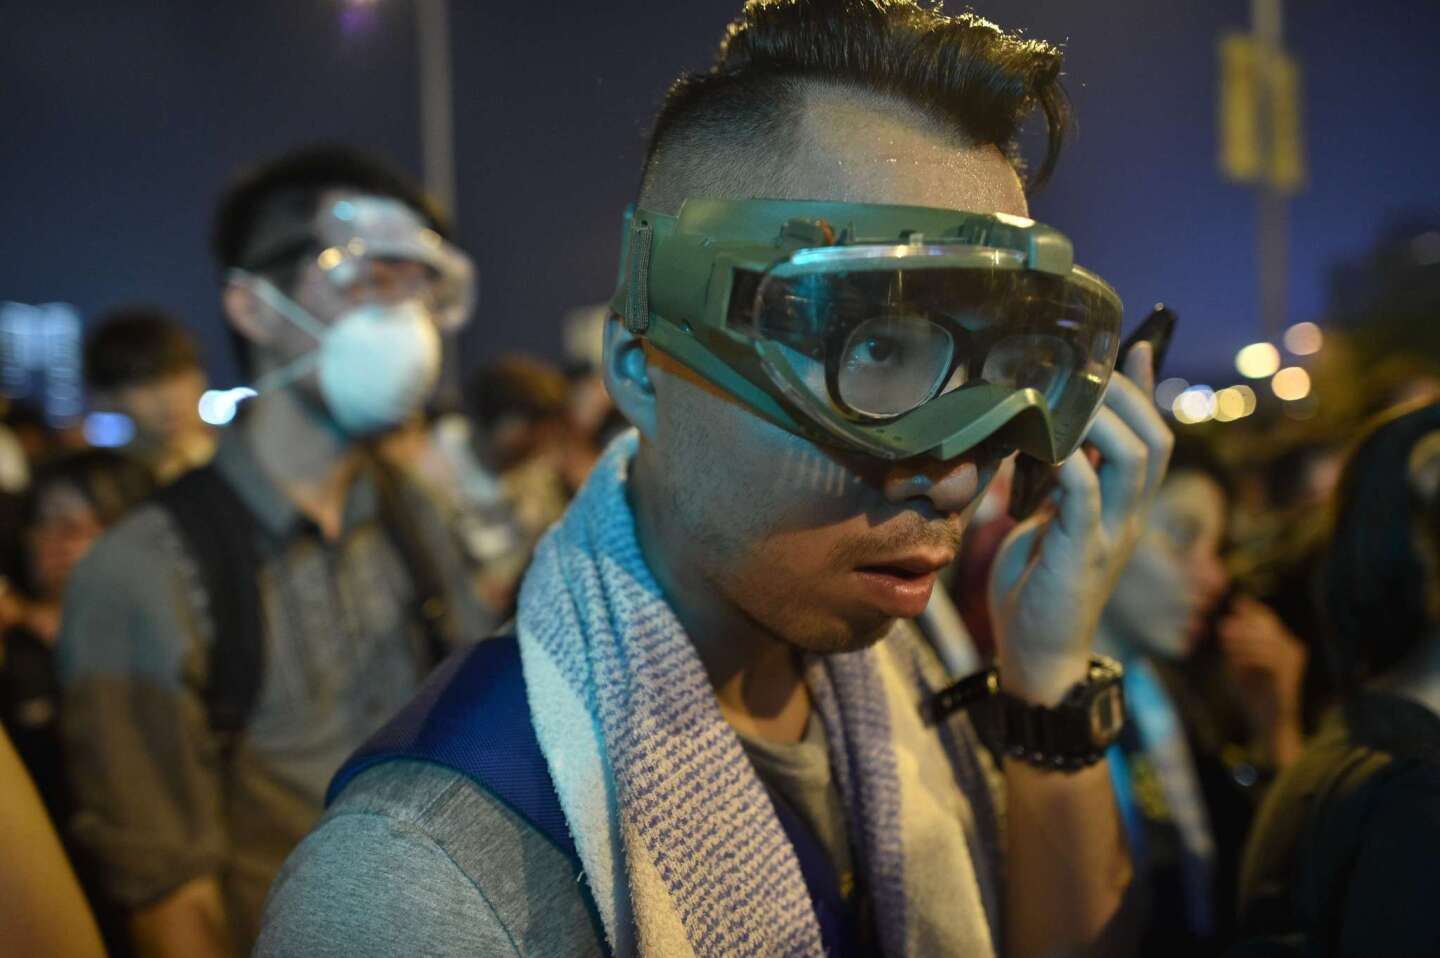 A demonstrator near government headquarters in Hong Kong checks his phone.